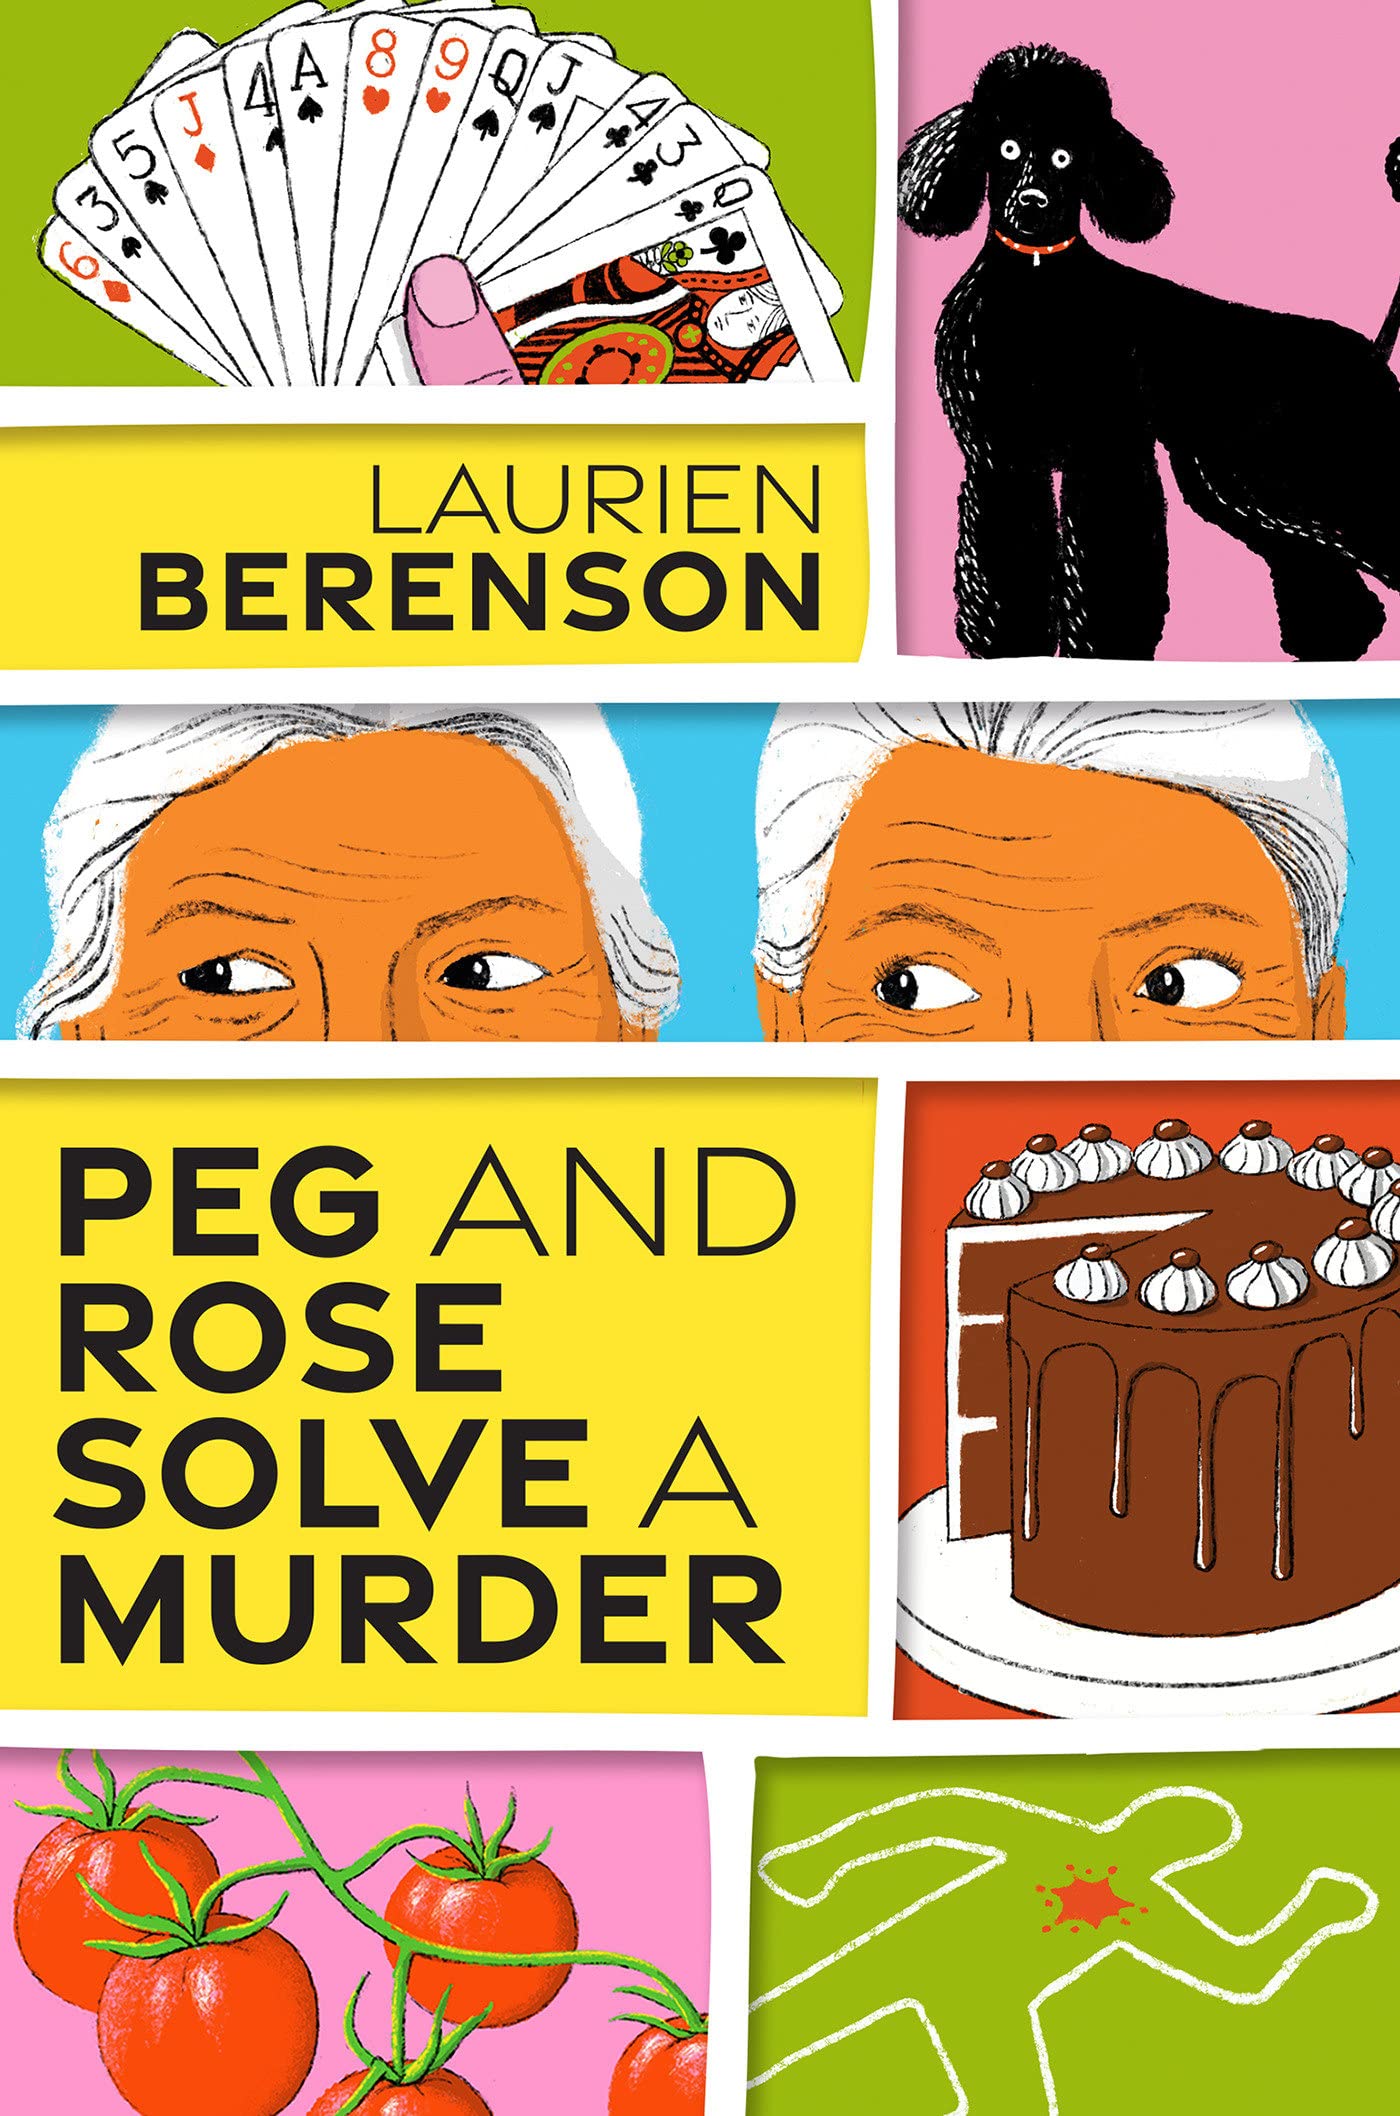 book cover for "Peg and Rose Solve a Murder"